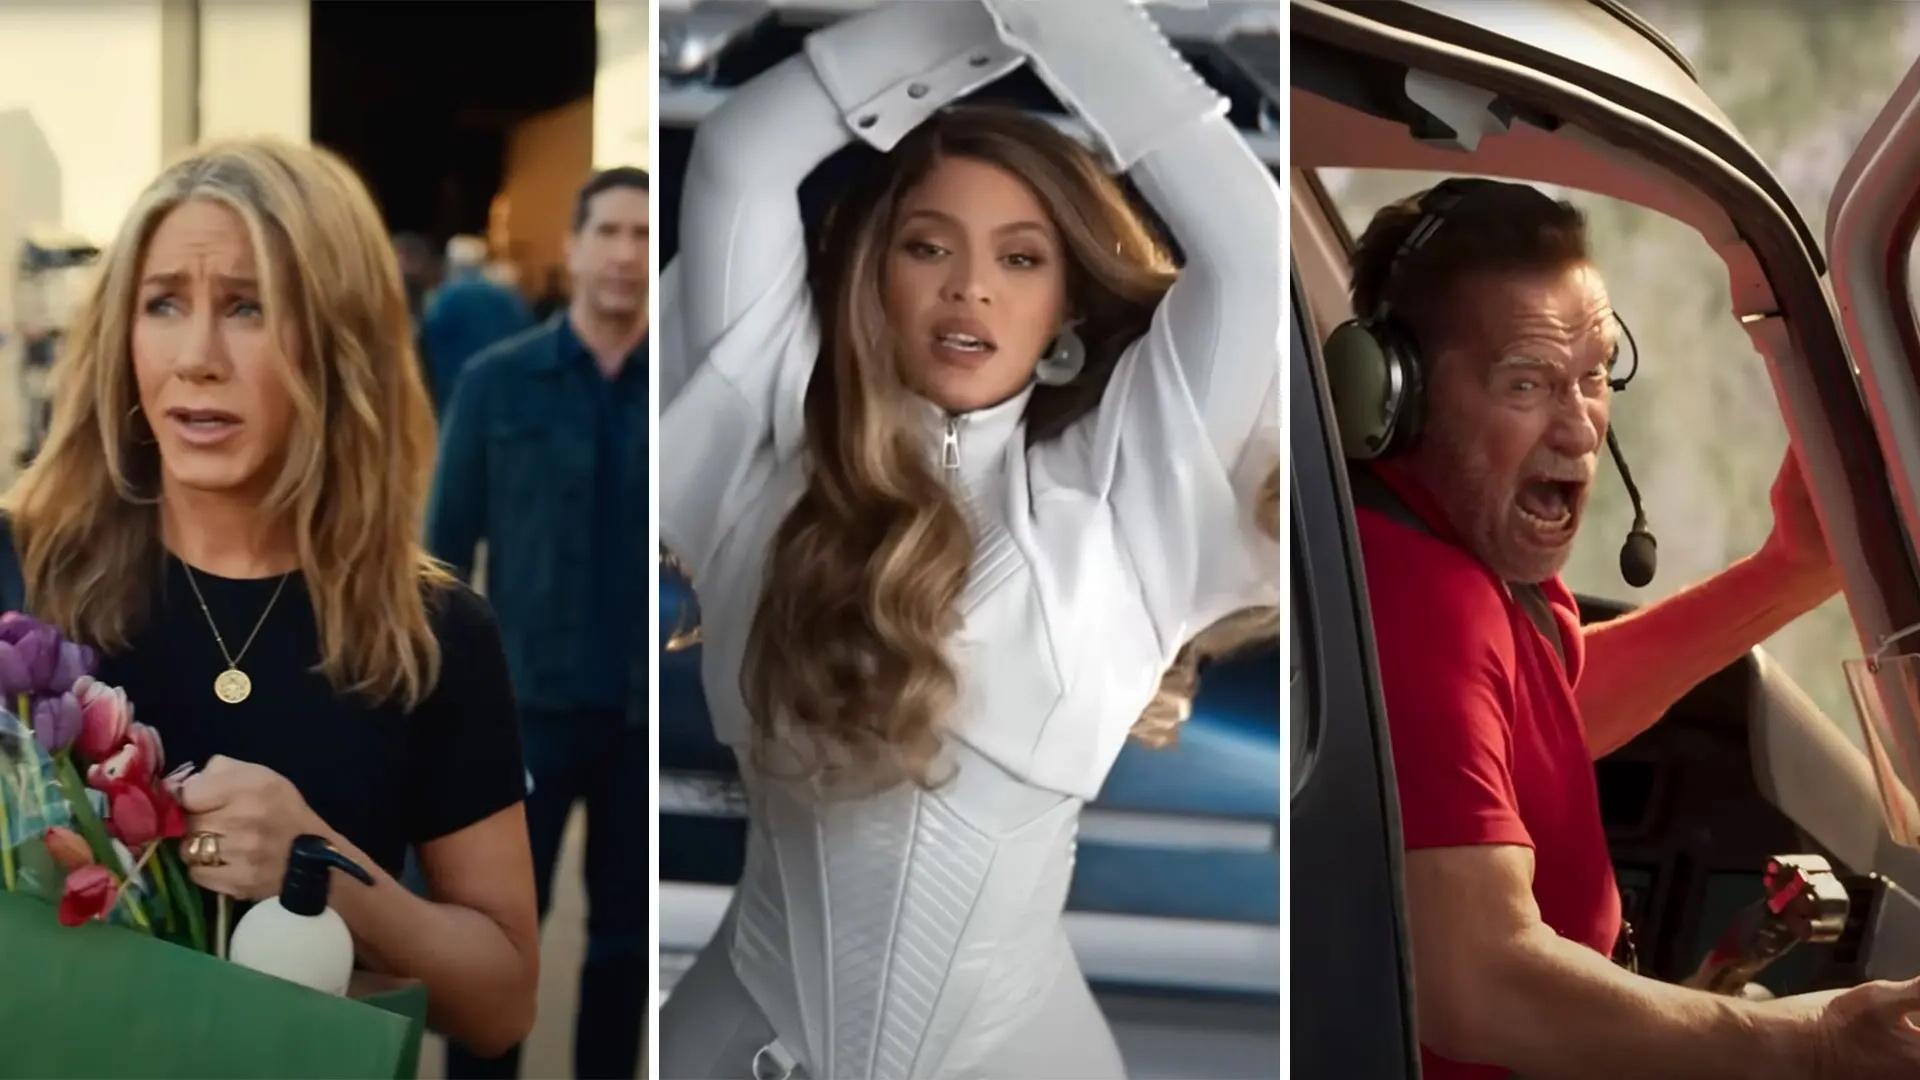 Arnold Schwarzenegger, Beyoncé and Jennifer Aniston all starred in Super Bowl ads last night, during an evening that featured a cavalcade of celebrities pitching products—and themselves. Commercial stills courtesy of State Farm, Verizon and Uber Eats